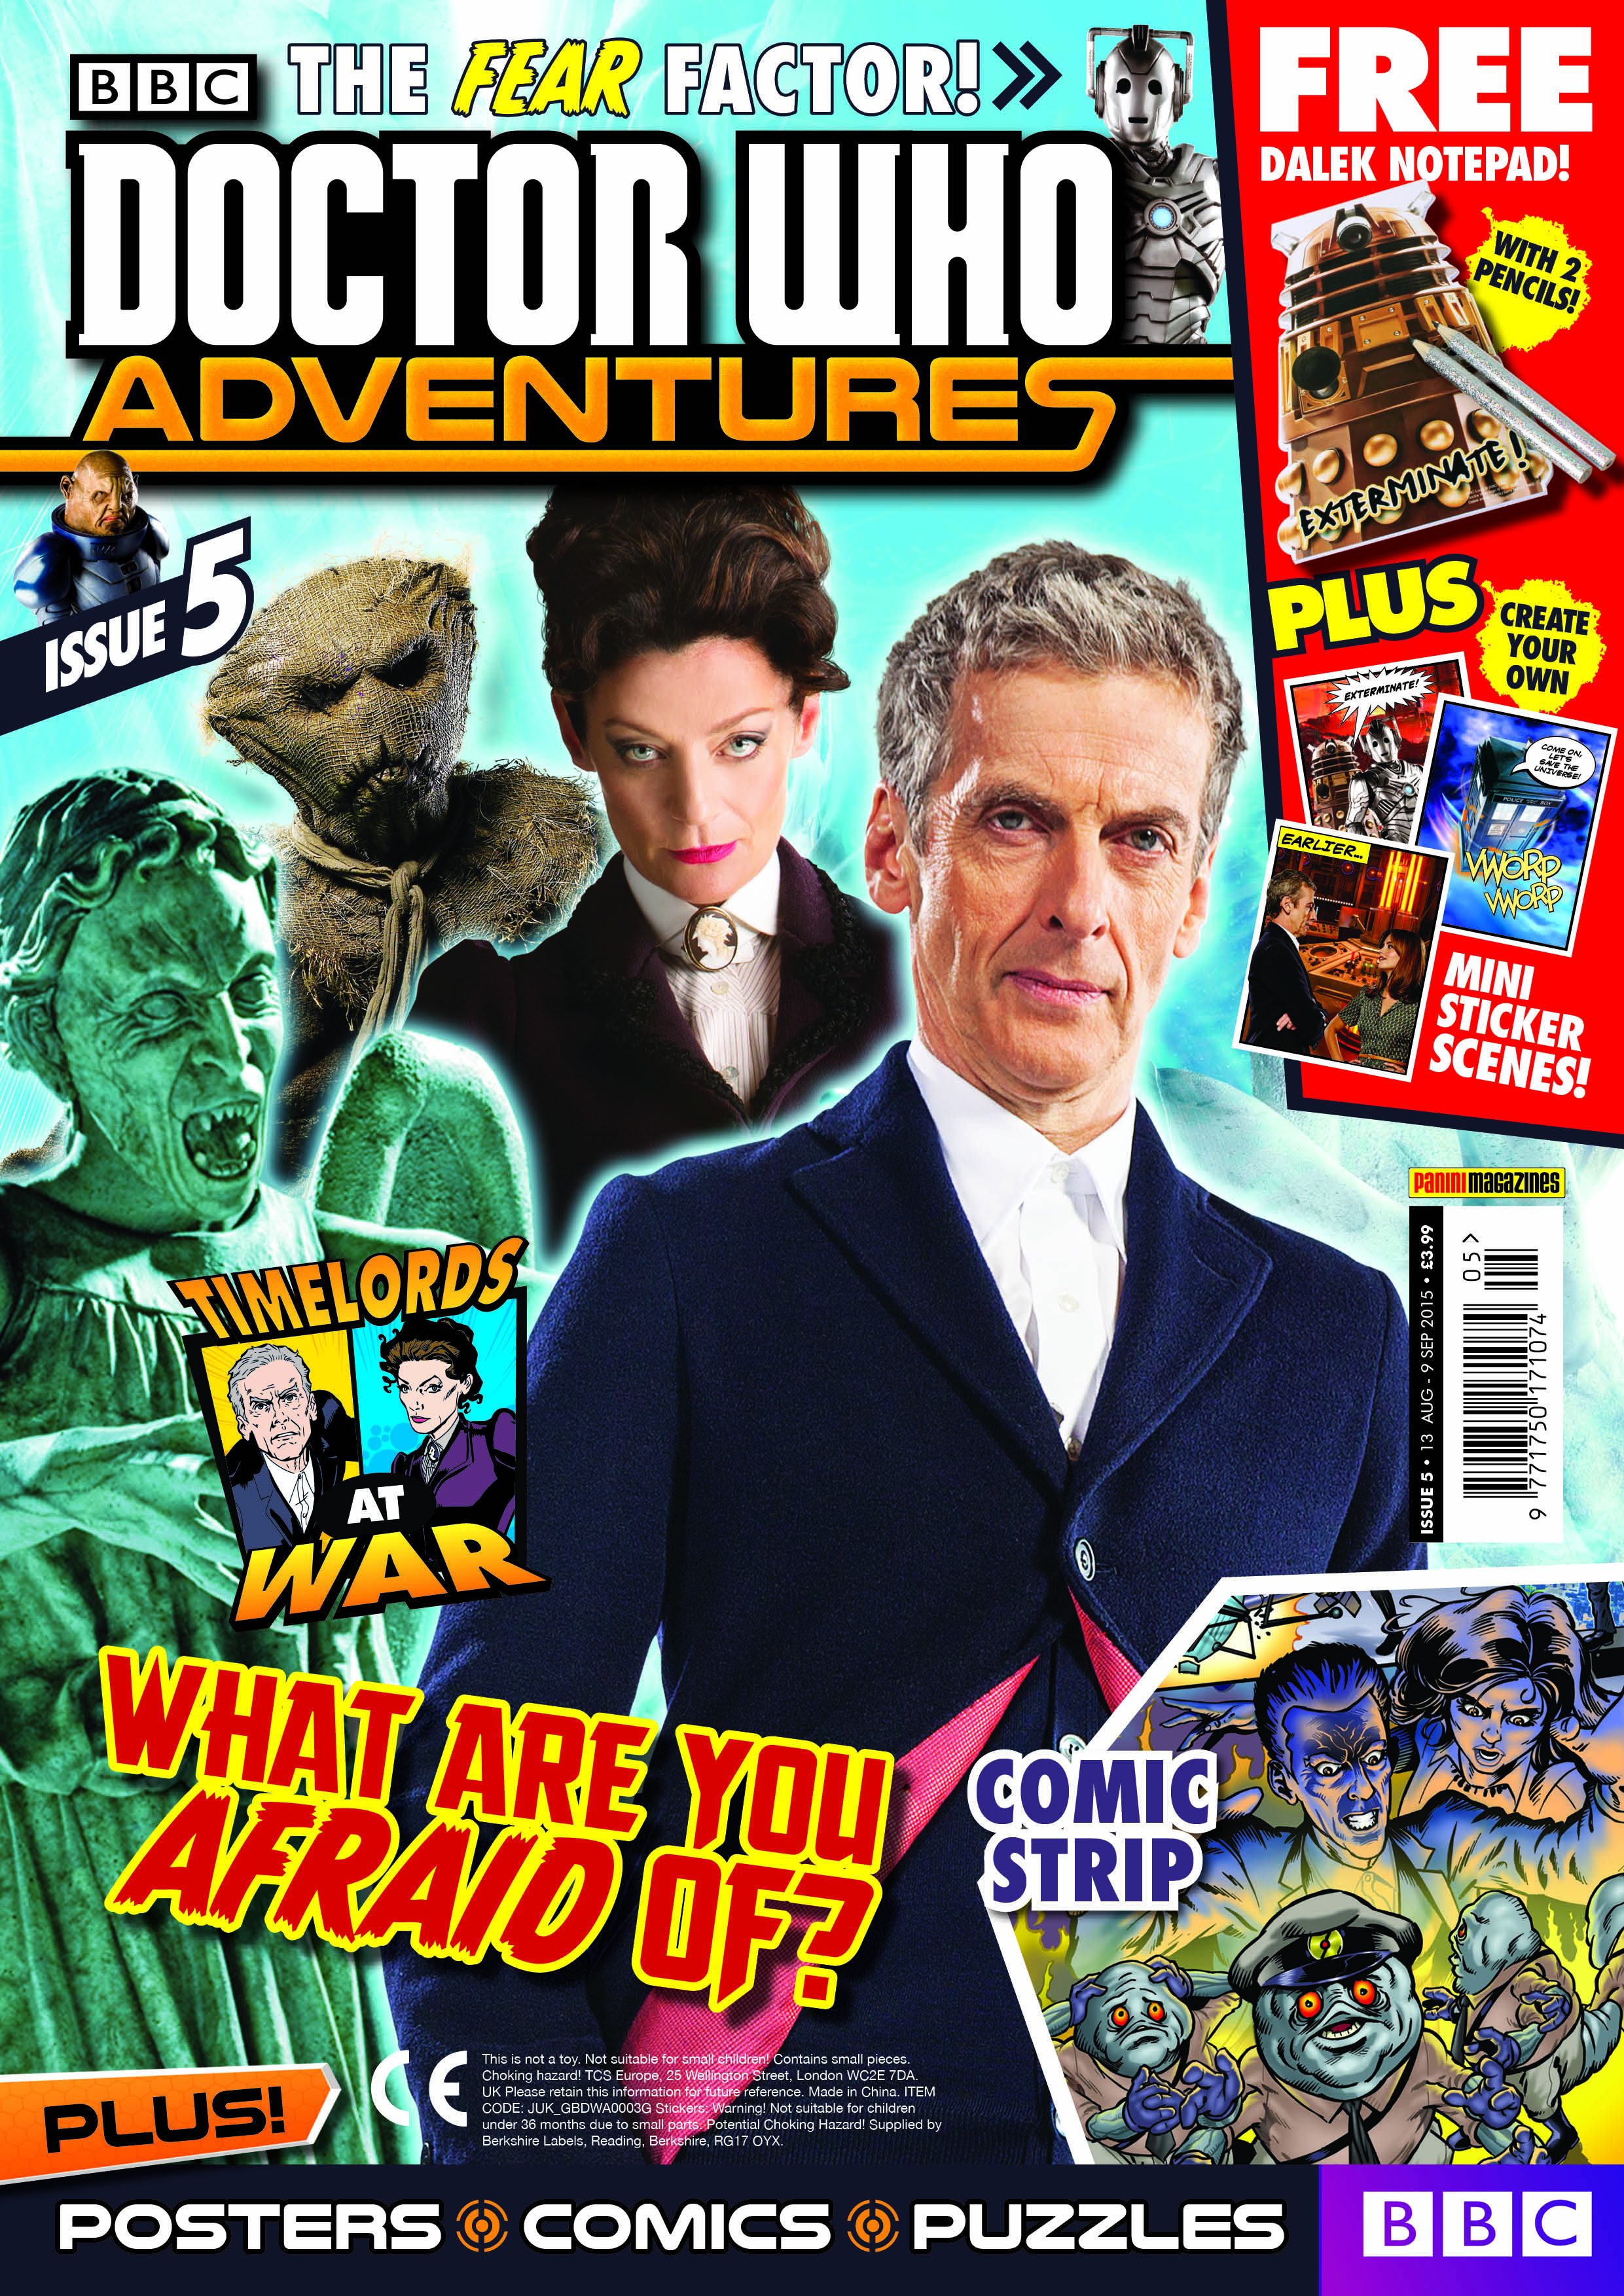 Doctor Who Adventures Issue 5 - Cover